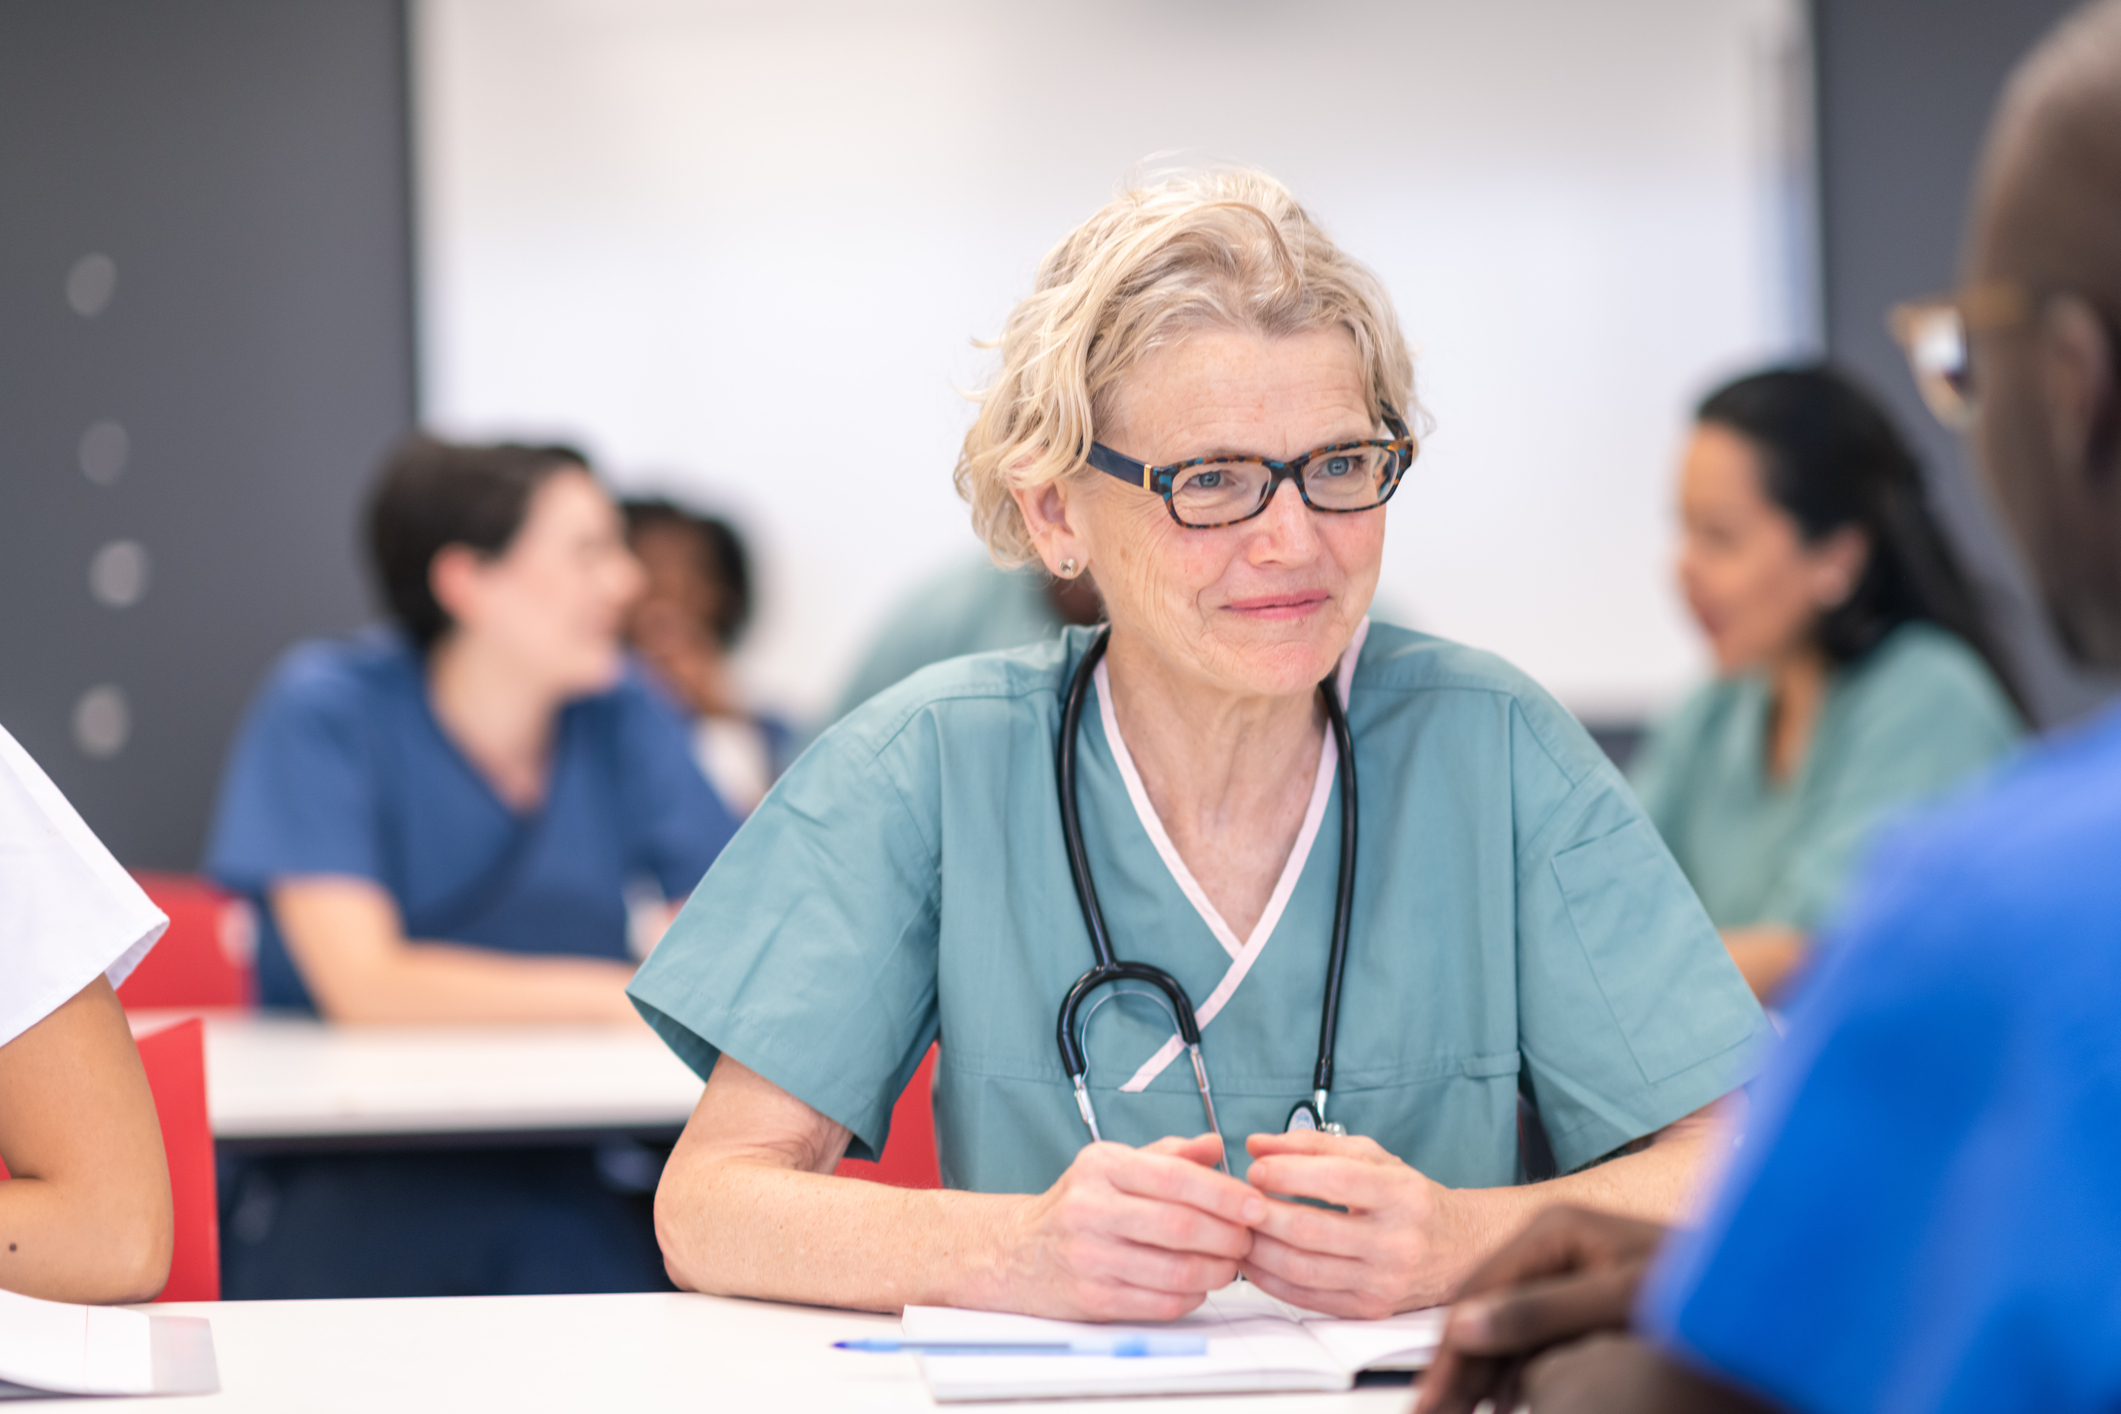 Older adult nurse learning in a classroom setting